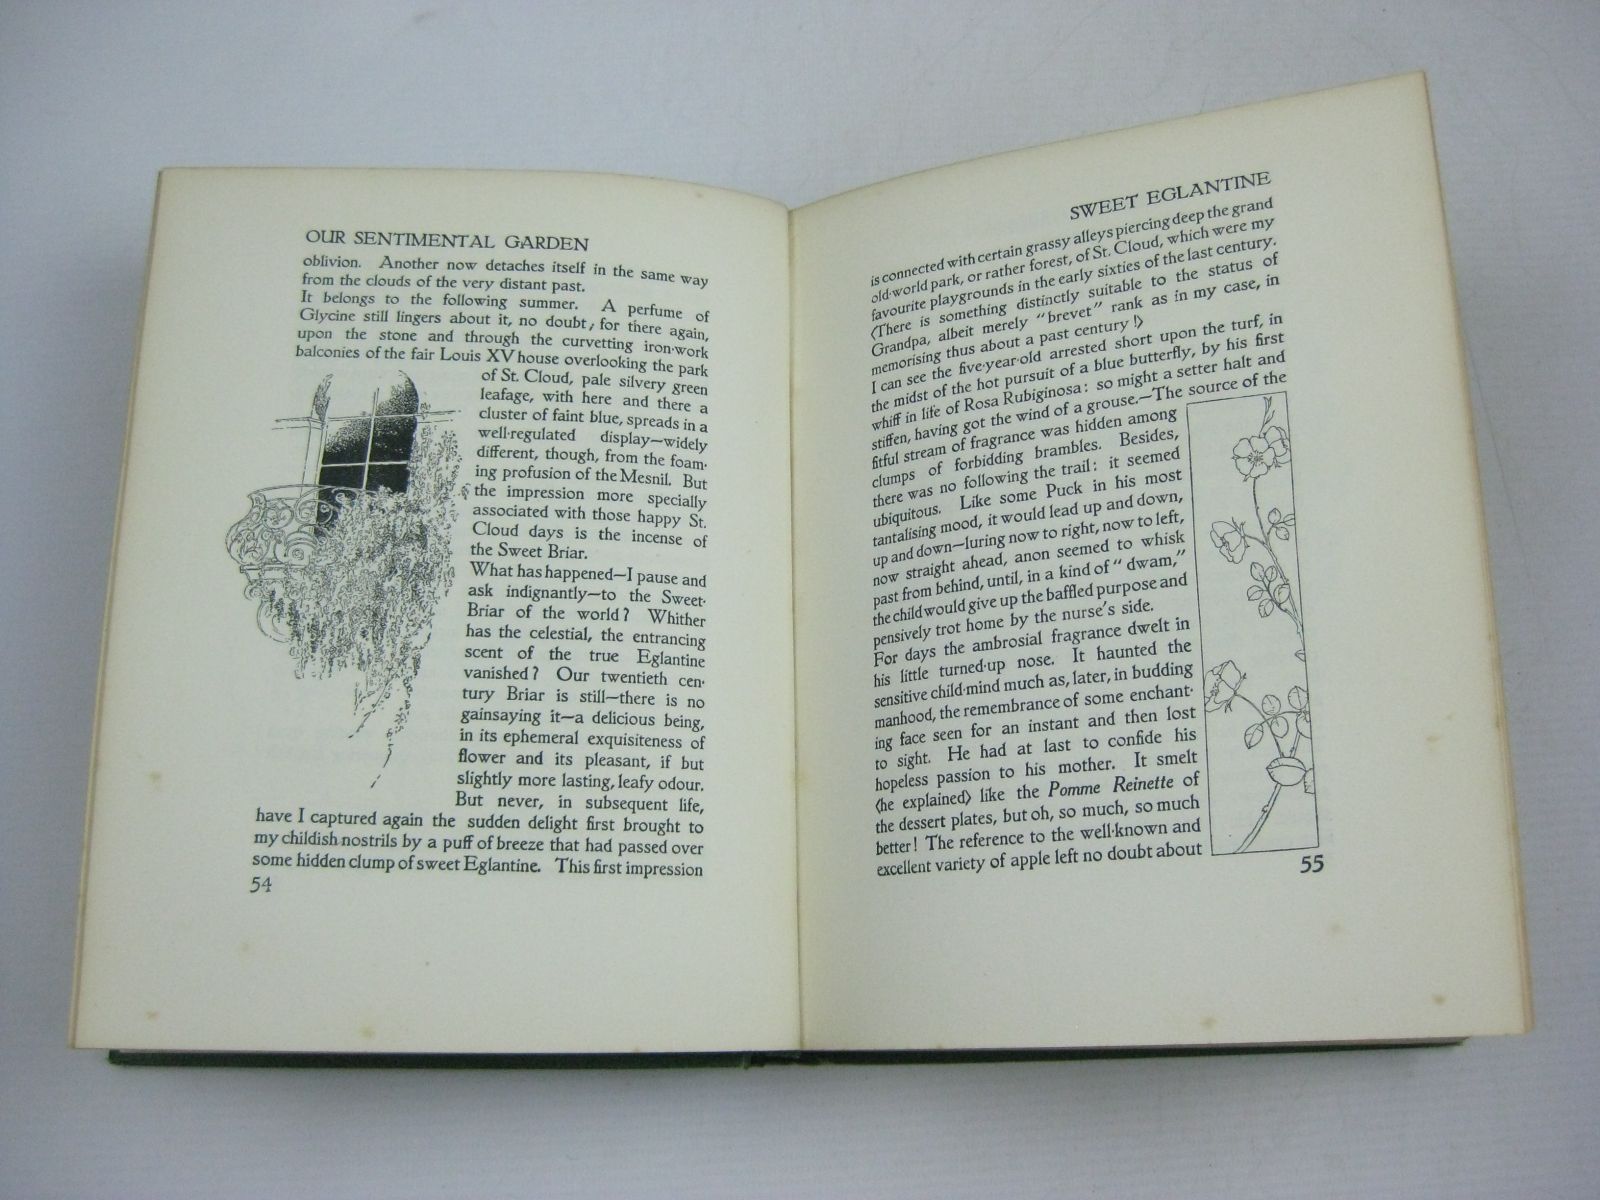 Photo of OUR SENTIMENTAL GARDEN written by Castle, Agnes
Castle, Egerton illustrated by Robinson, Charles published by William Heinemann (STOCK CODE: 1404229)  for sale by Stella & Rose's Books